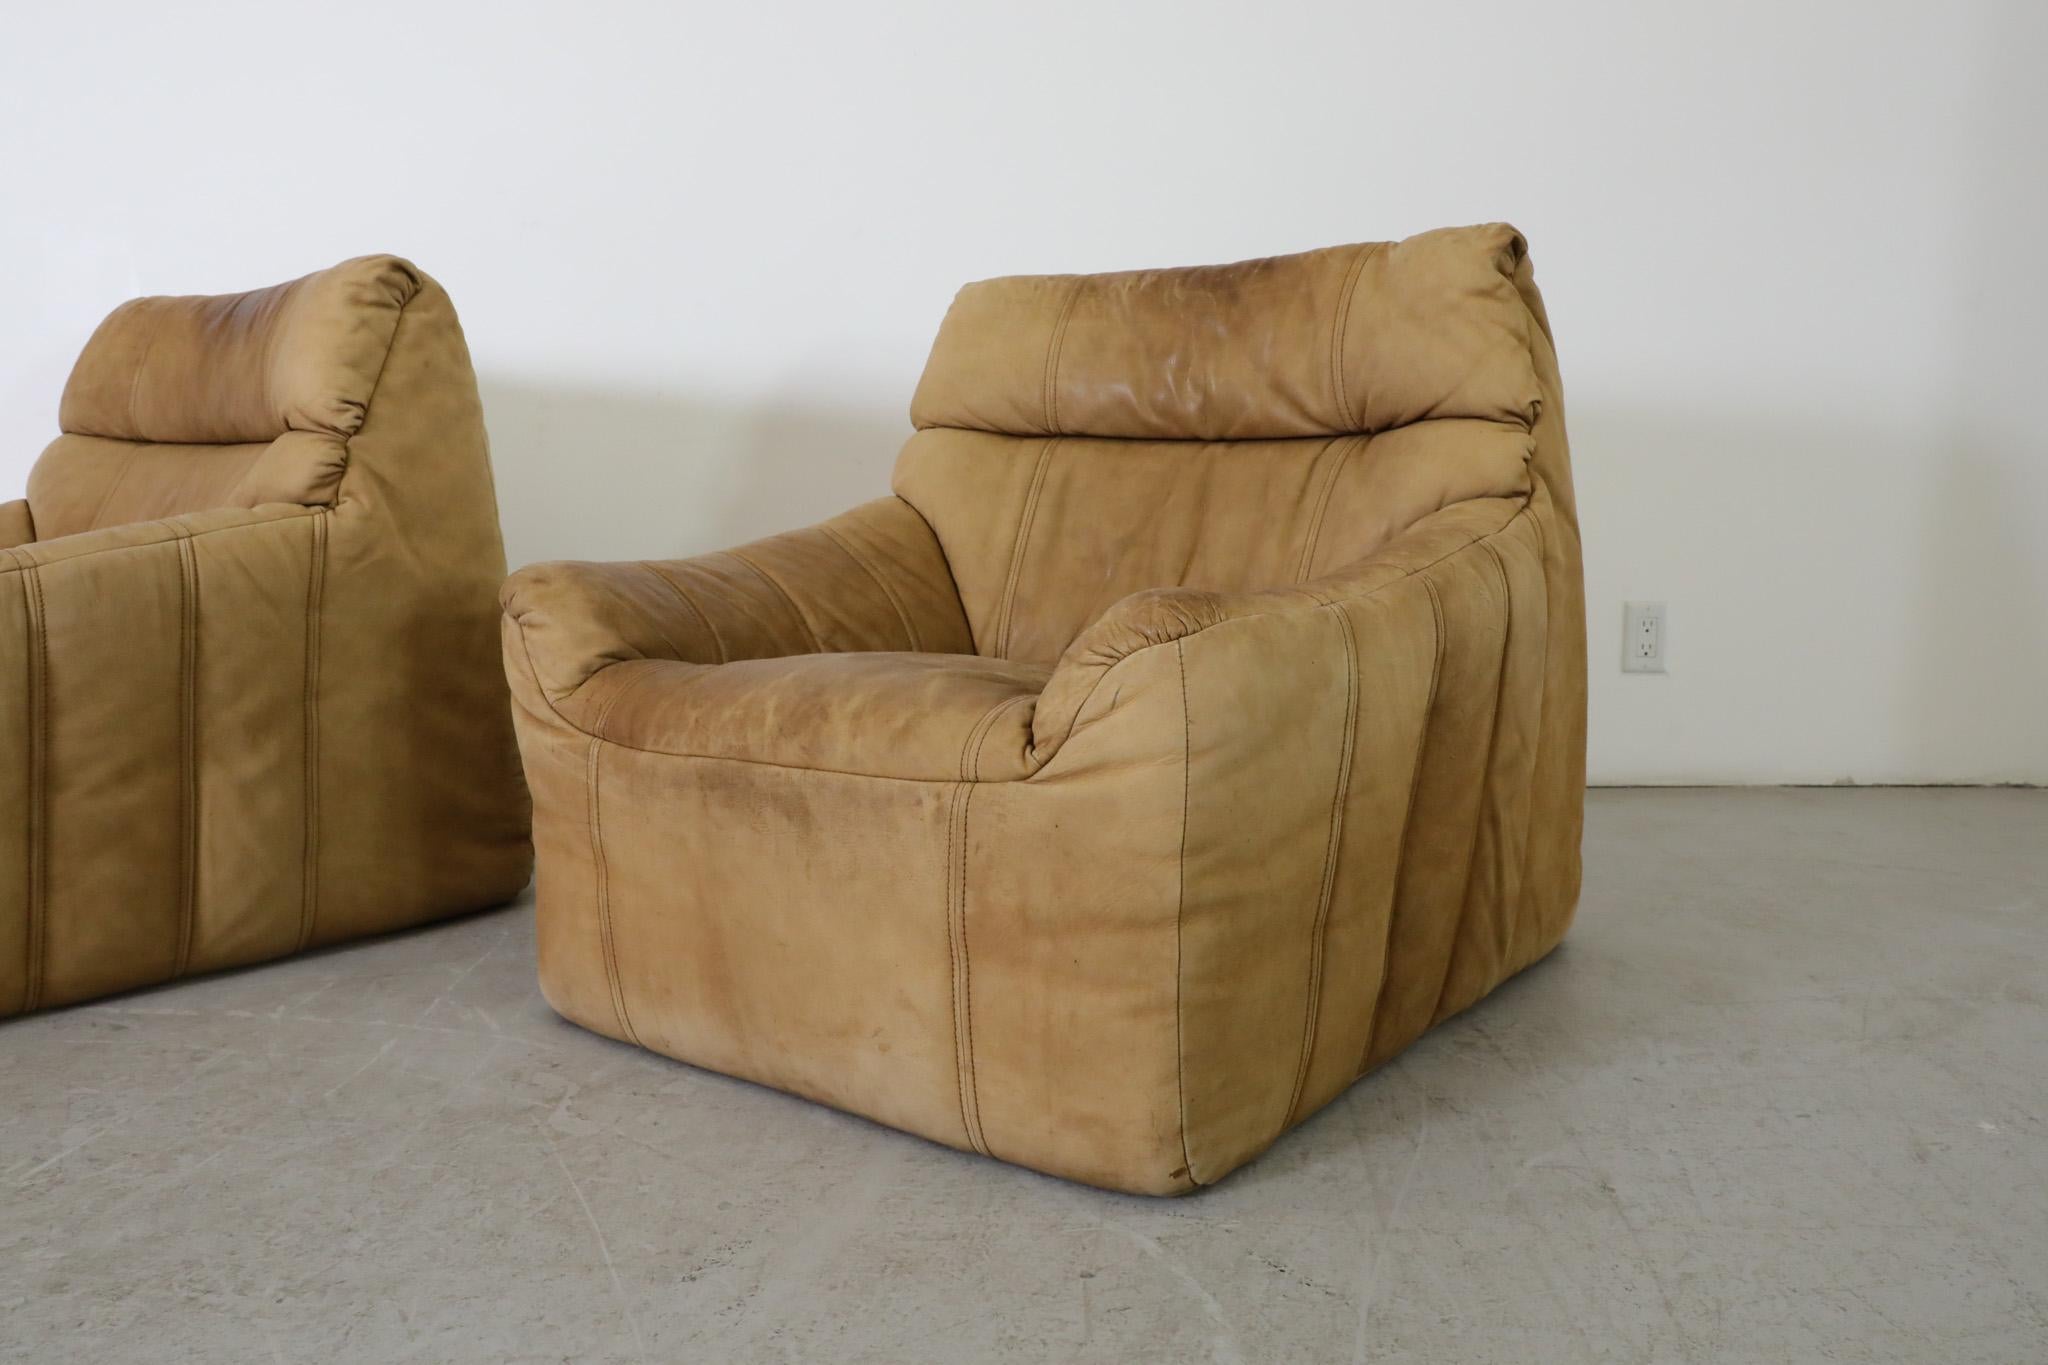 Pair of 1970s Rolf Benz Buck Leather Lounge Chairs For Sale 6